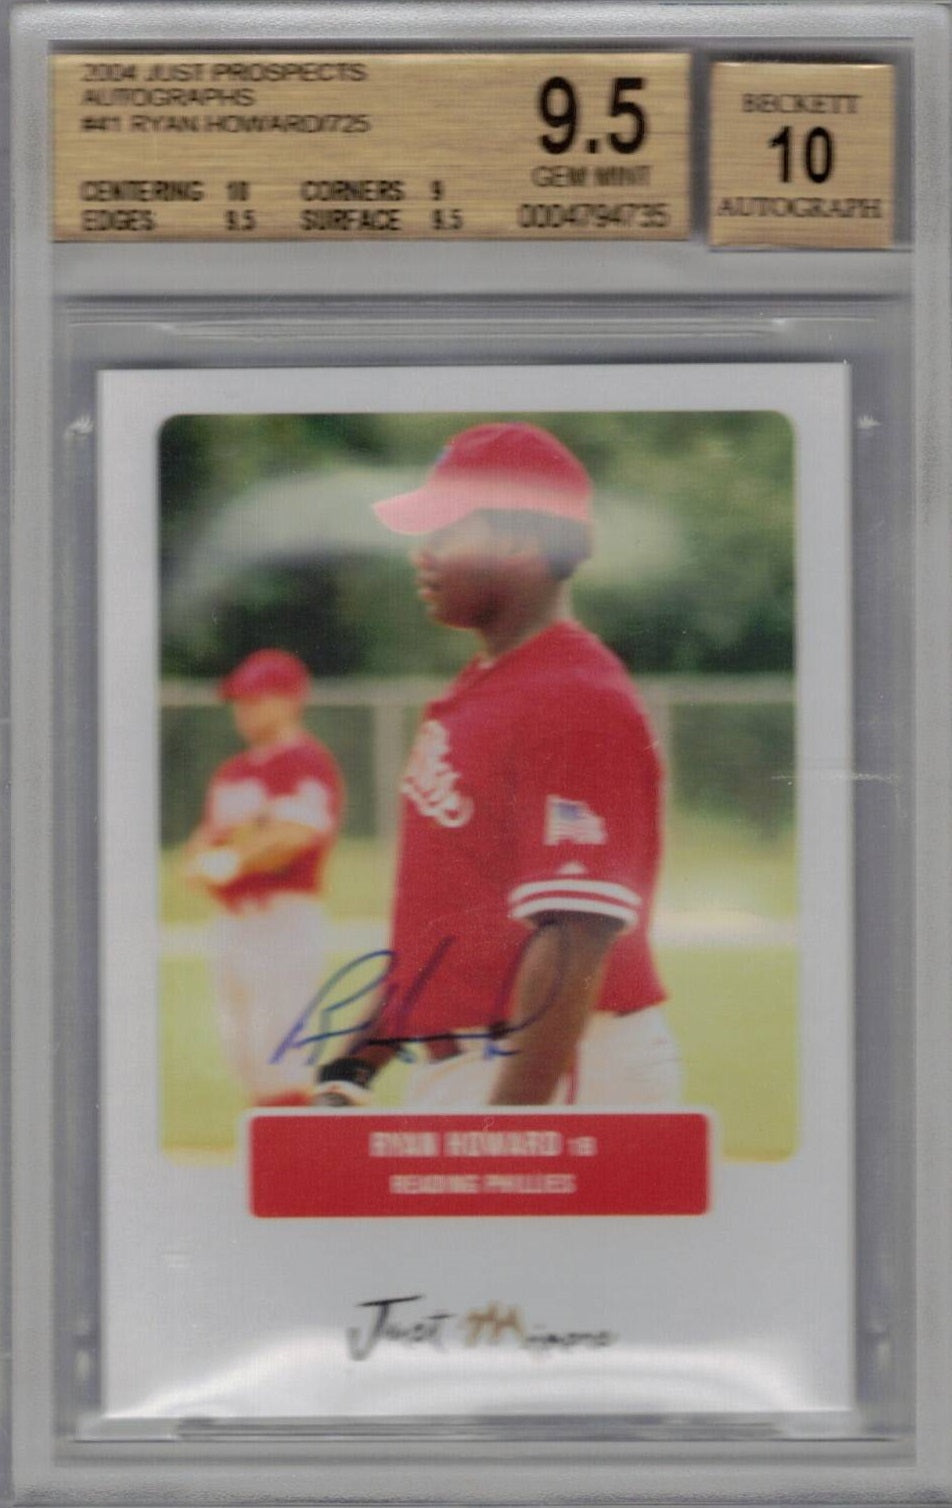 Ryan Howard 2004 Just Prospects #41 Auto 725 Made Rookie Card BGS 9.5 —  Rookie Cards